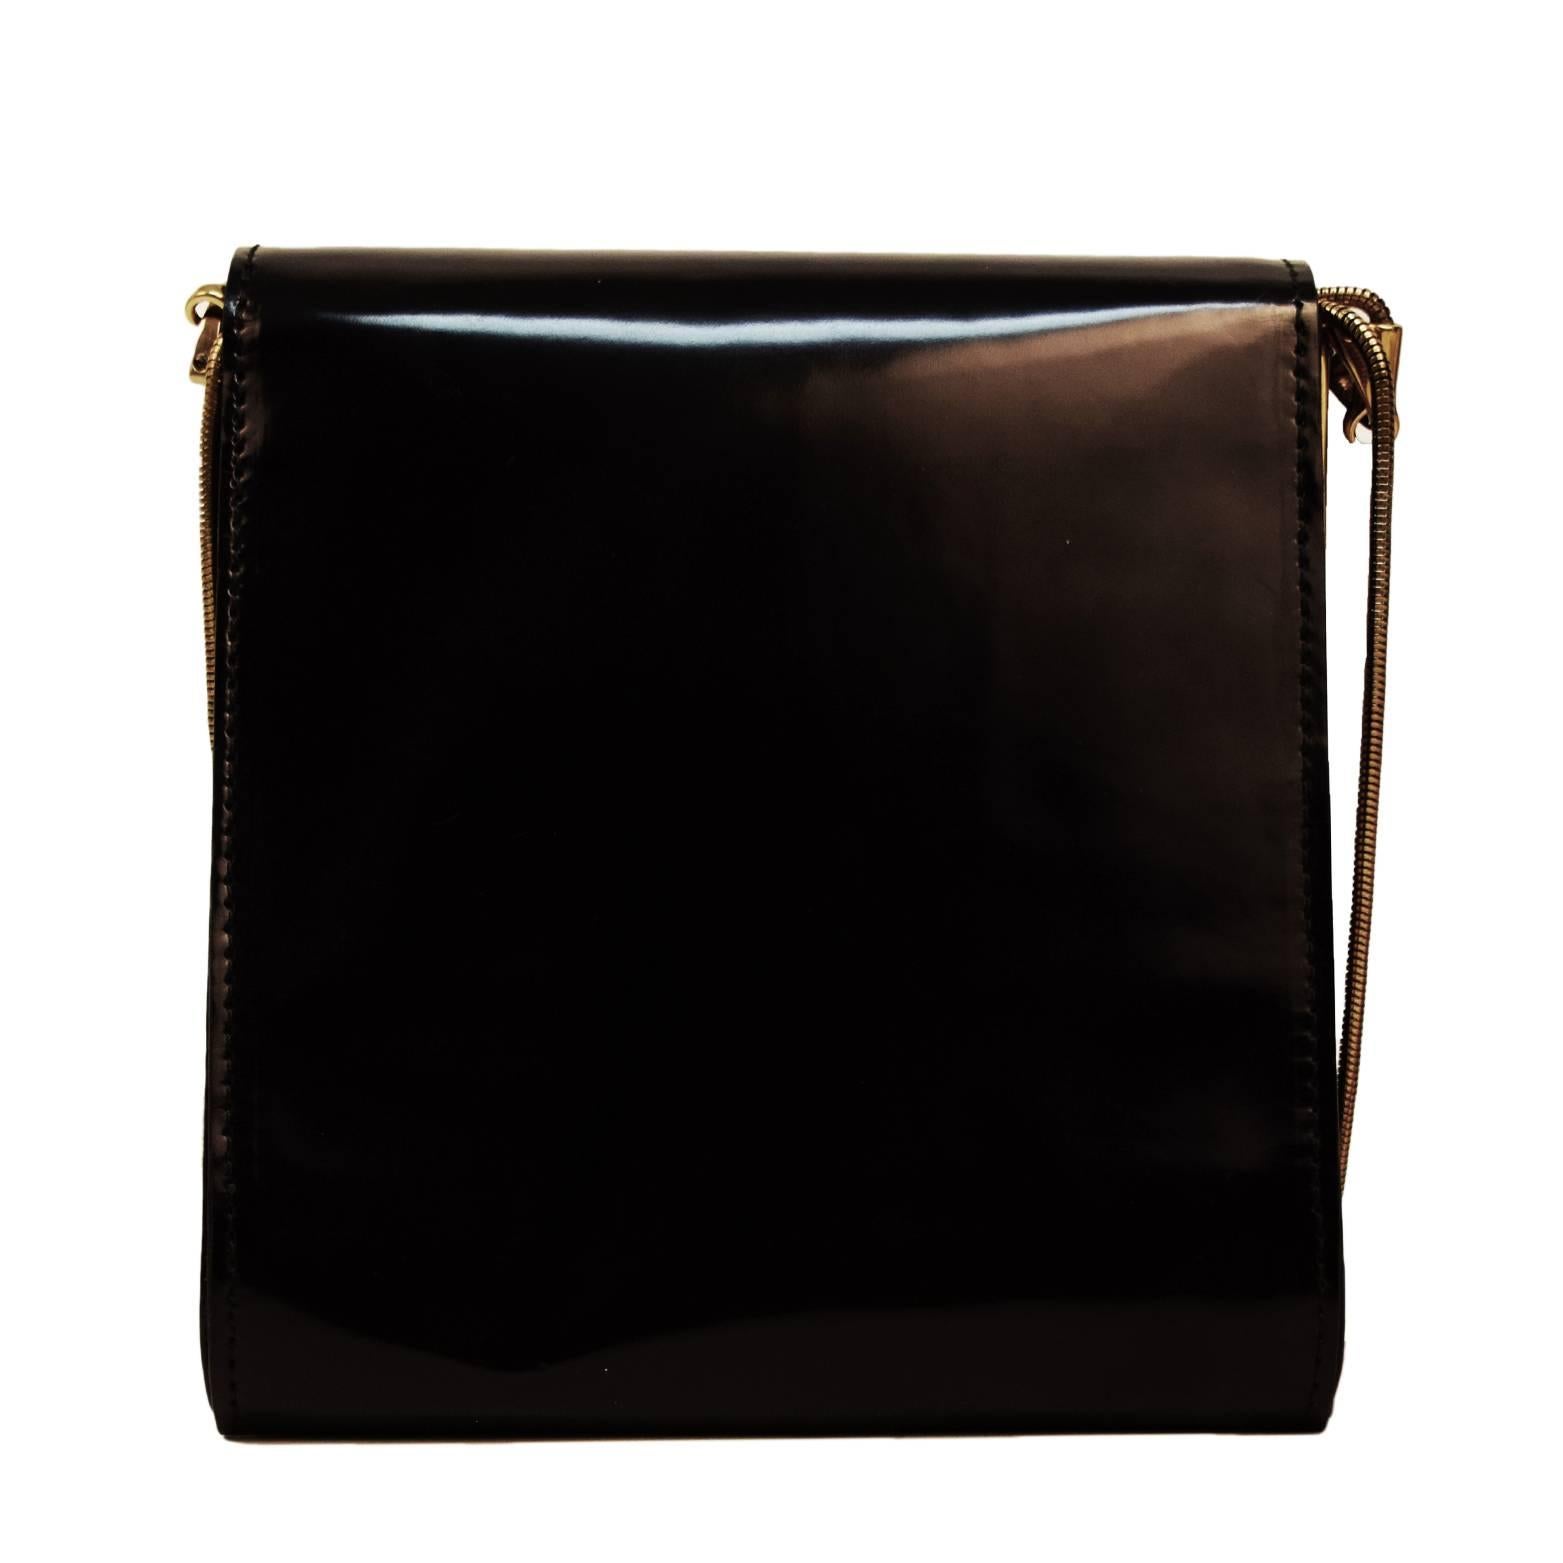 This Vionnet shoulder bag is black patent leather with a gold metal and leather blend bow embellishment. Snap closure and double flapped with two separate compartments. Shoulder strap is made from gold chain links and is very lightweight. $1200 SOLD